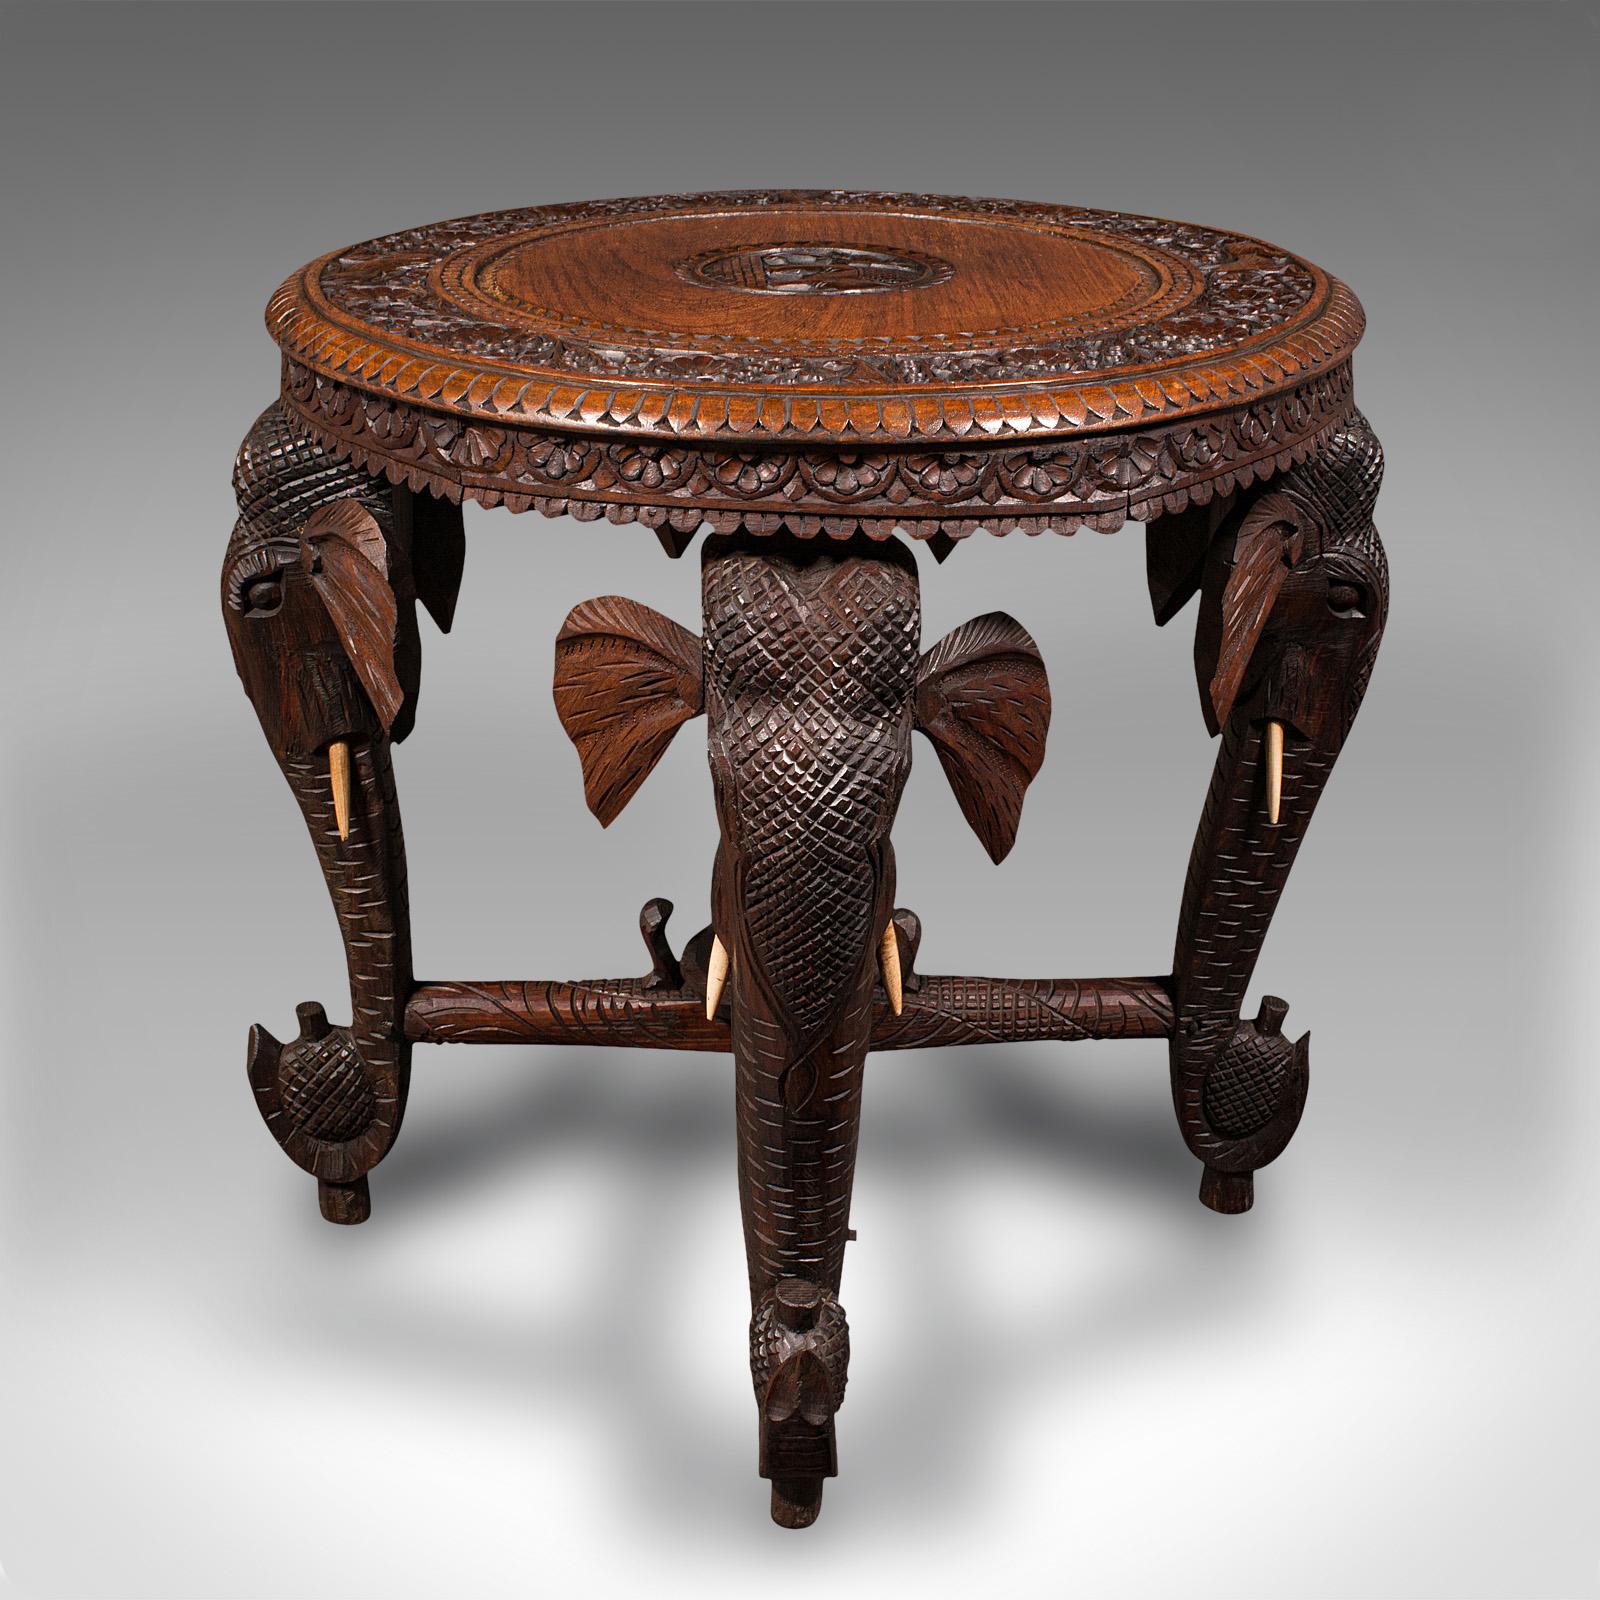 19th Century Antique Occasional Table, Indian Teak, Carved, Coffee, Elephants, Late Victorian